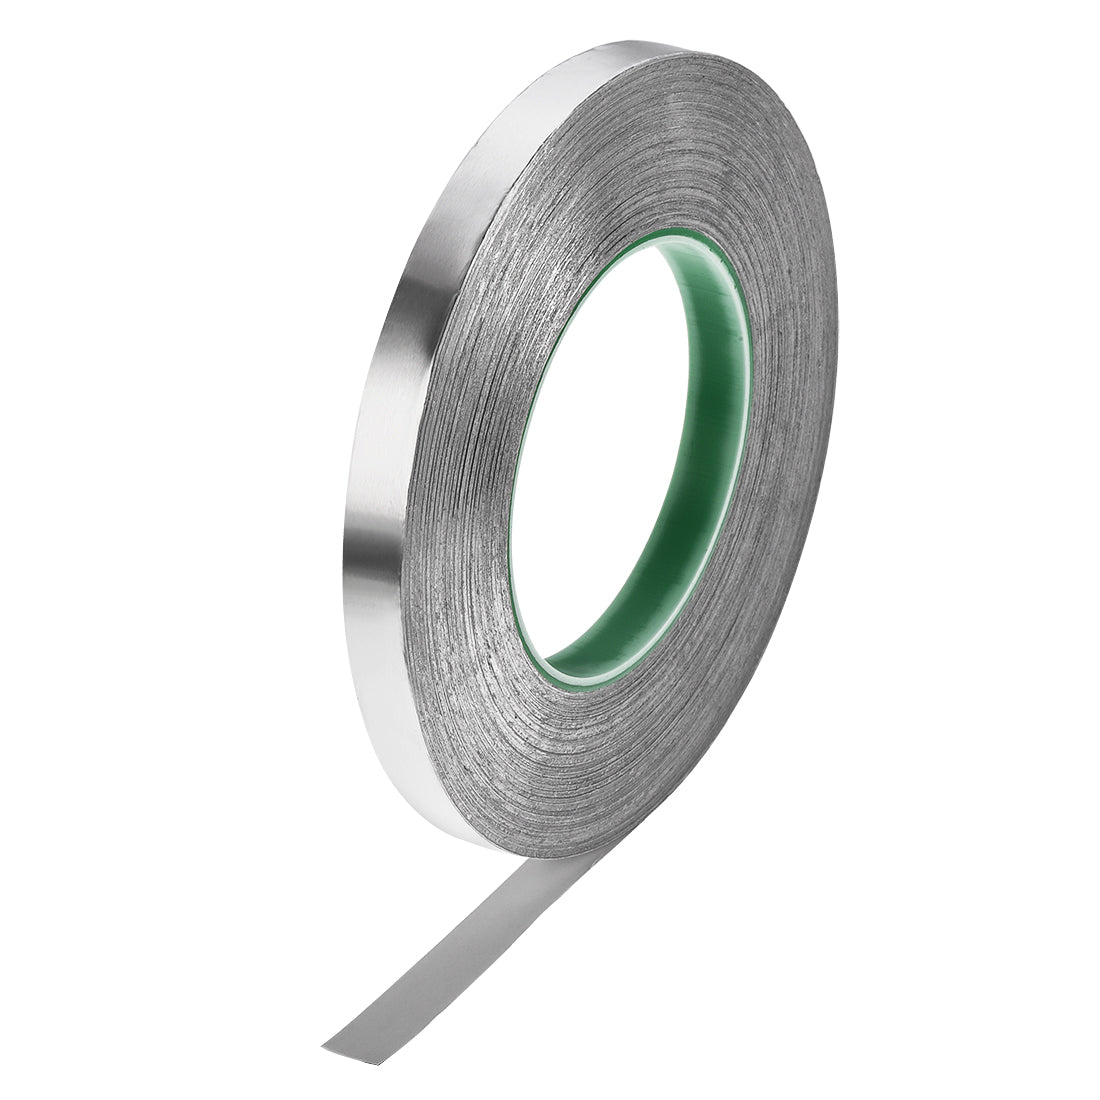 uxcell Uxcell 12mm Aluminum Foil Tape for HVAC,Patching Hot and Cold Air Ducts 50m/164ft